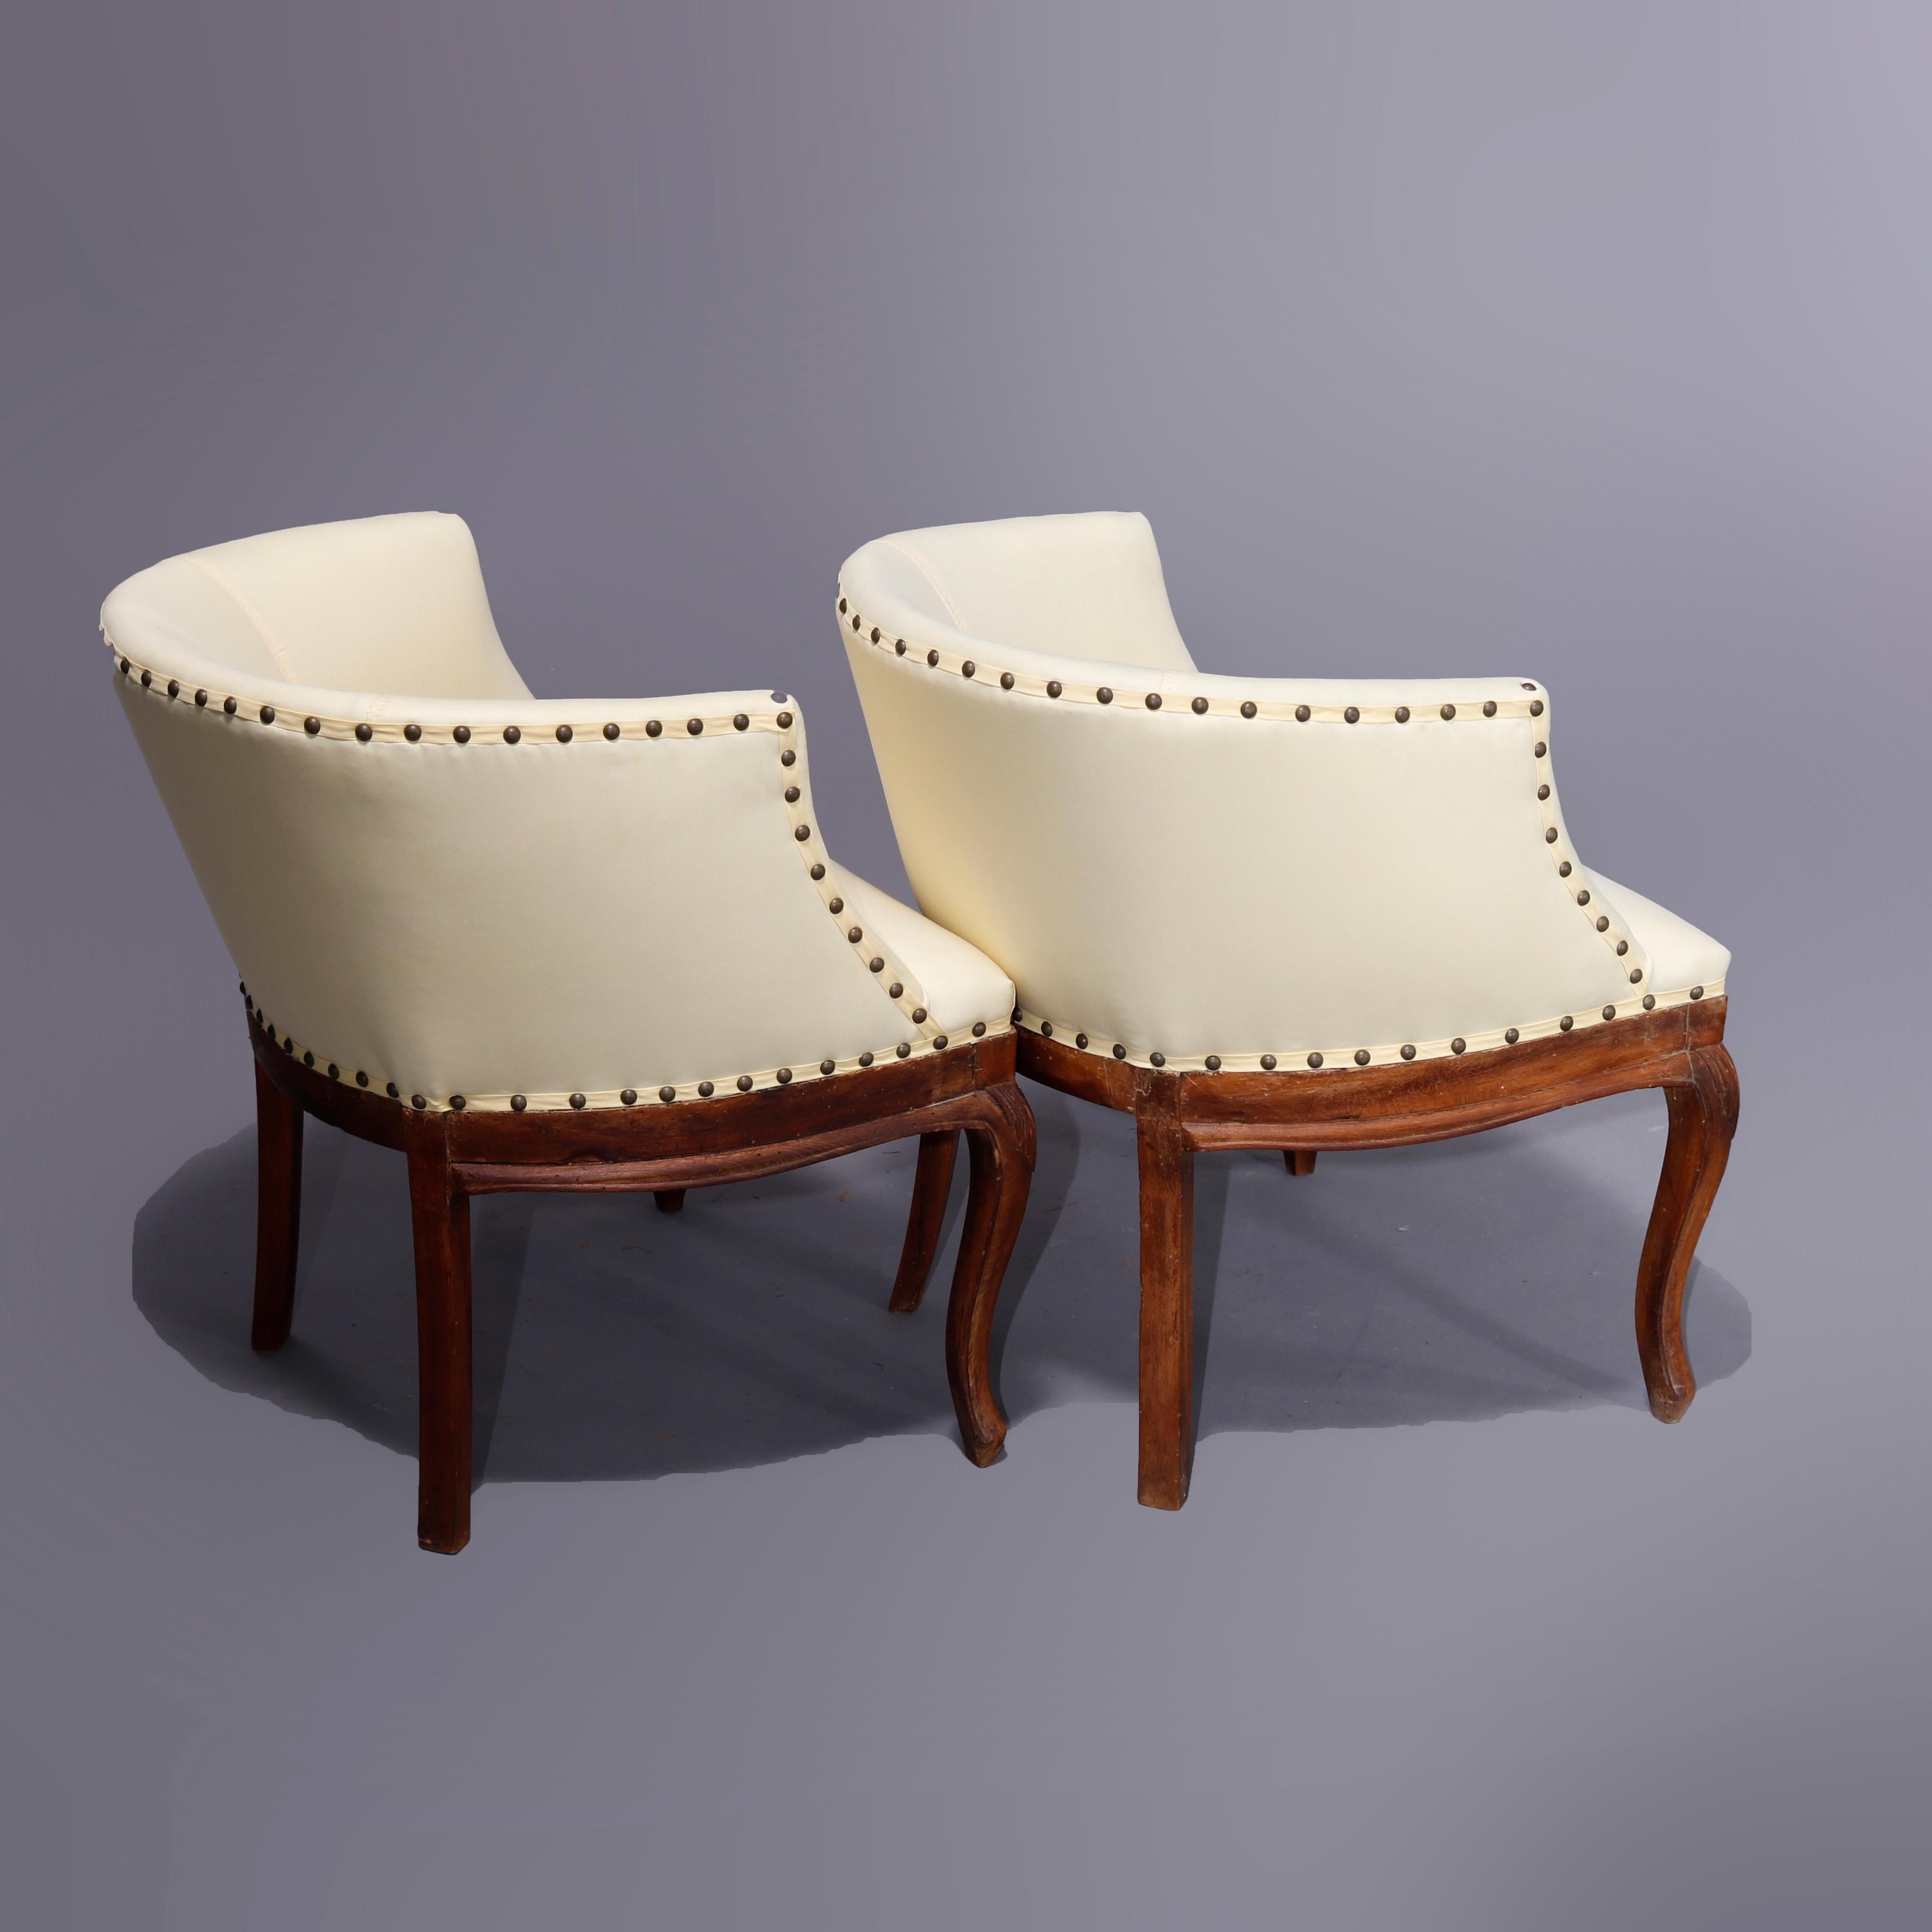 18th Century Antique Italian Walnut Side or Lounge Chairs, Late 18th to Early 19th Century